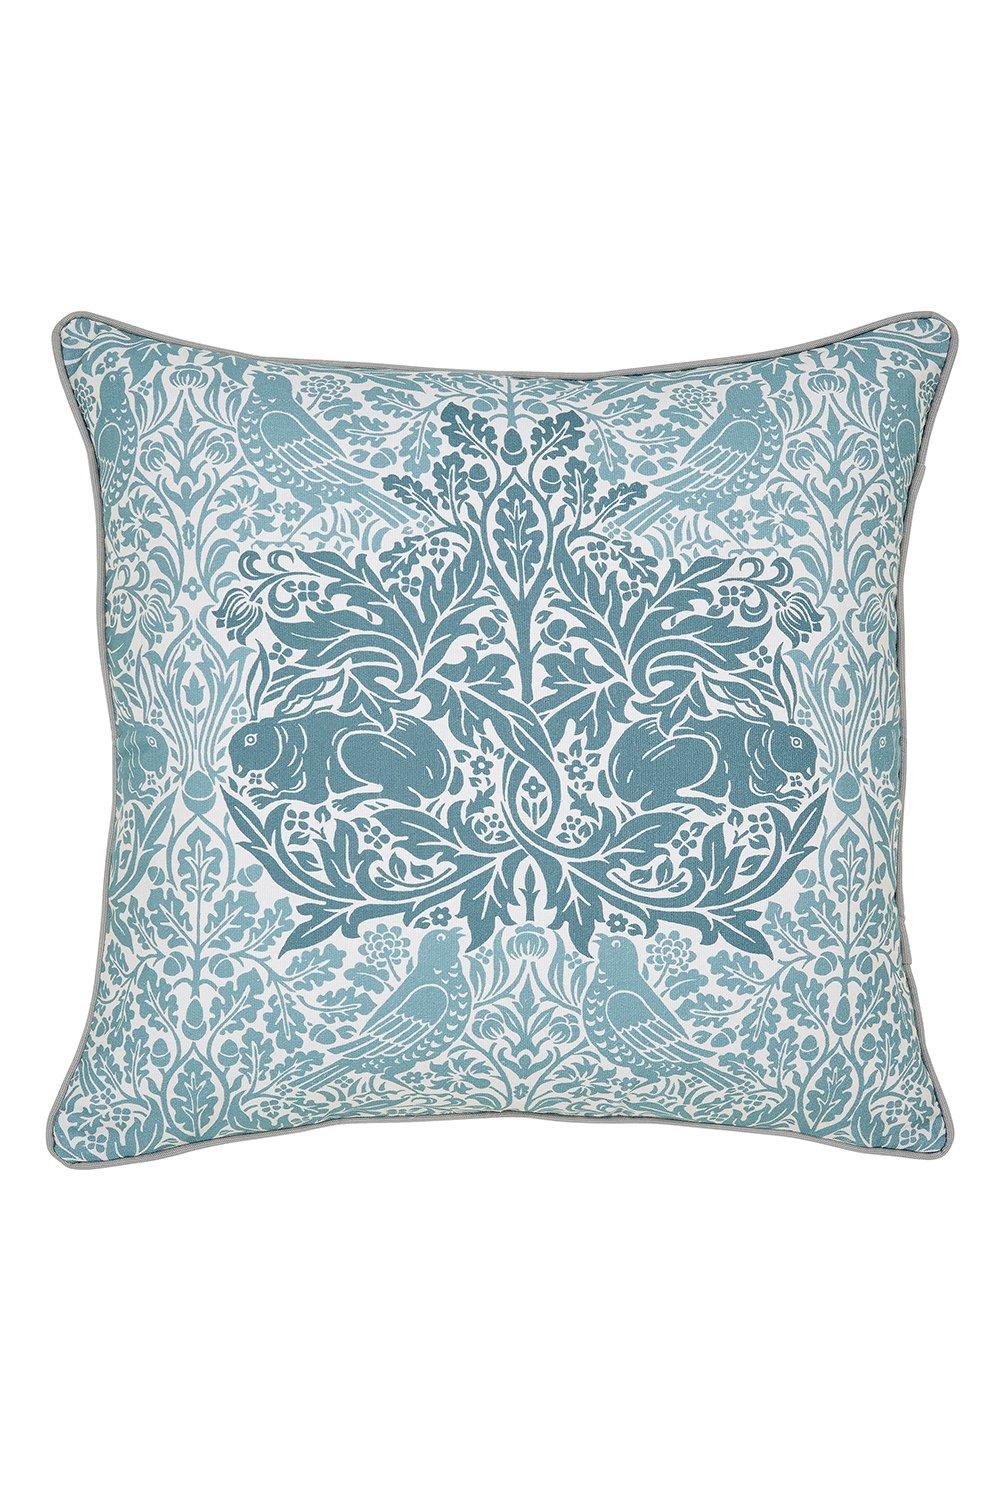 'Golden Lily' Cotton Cushion